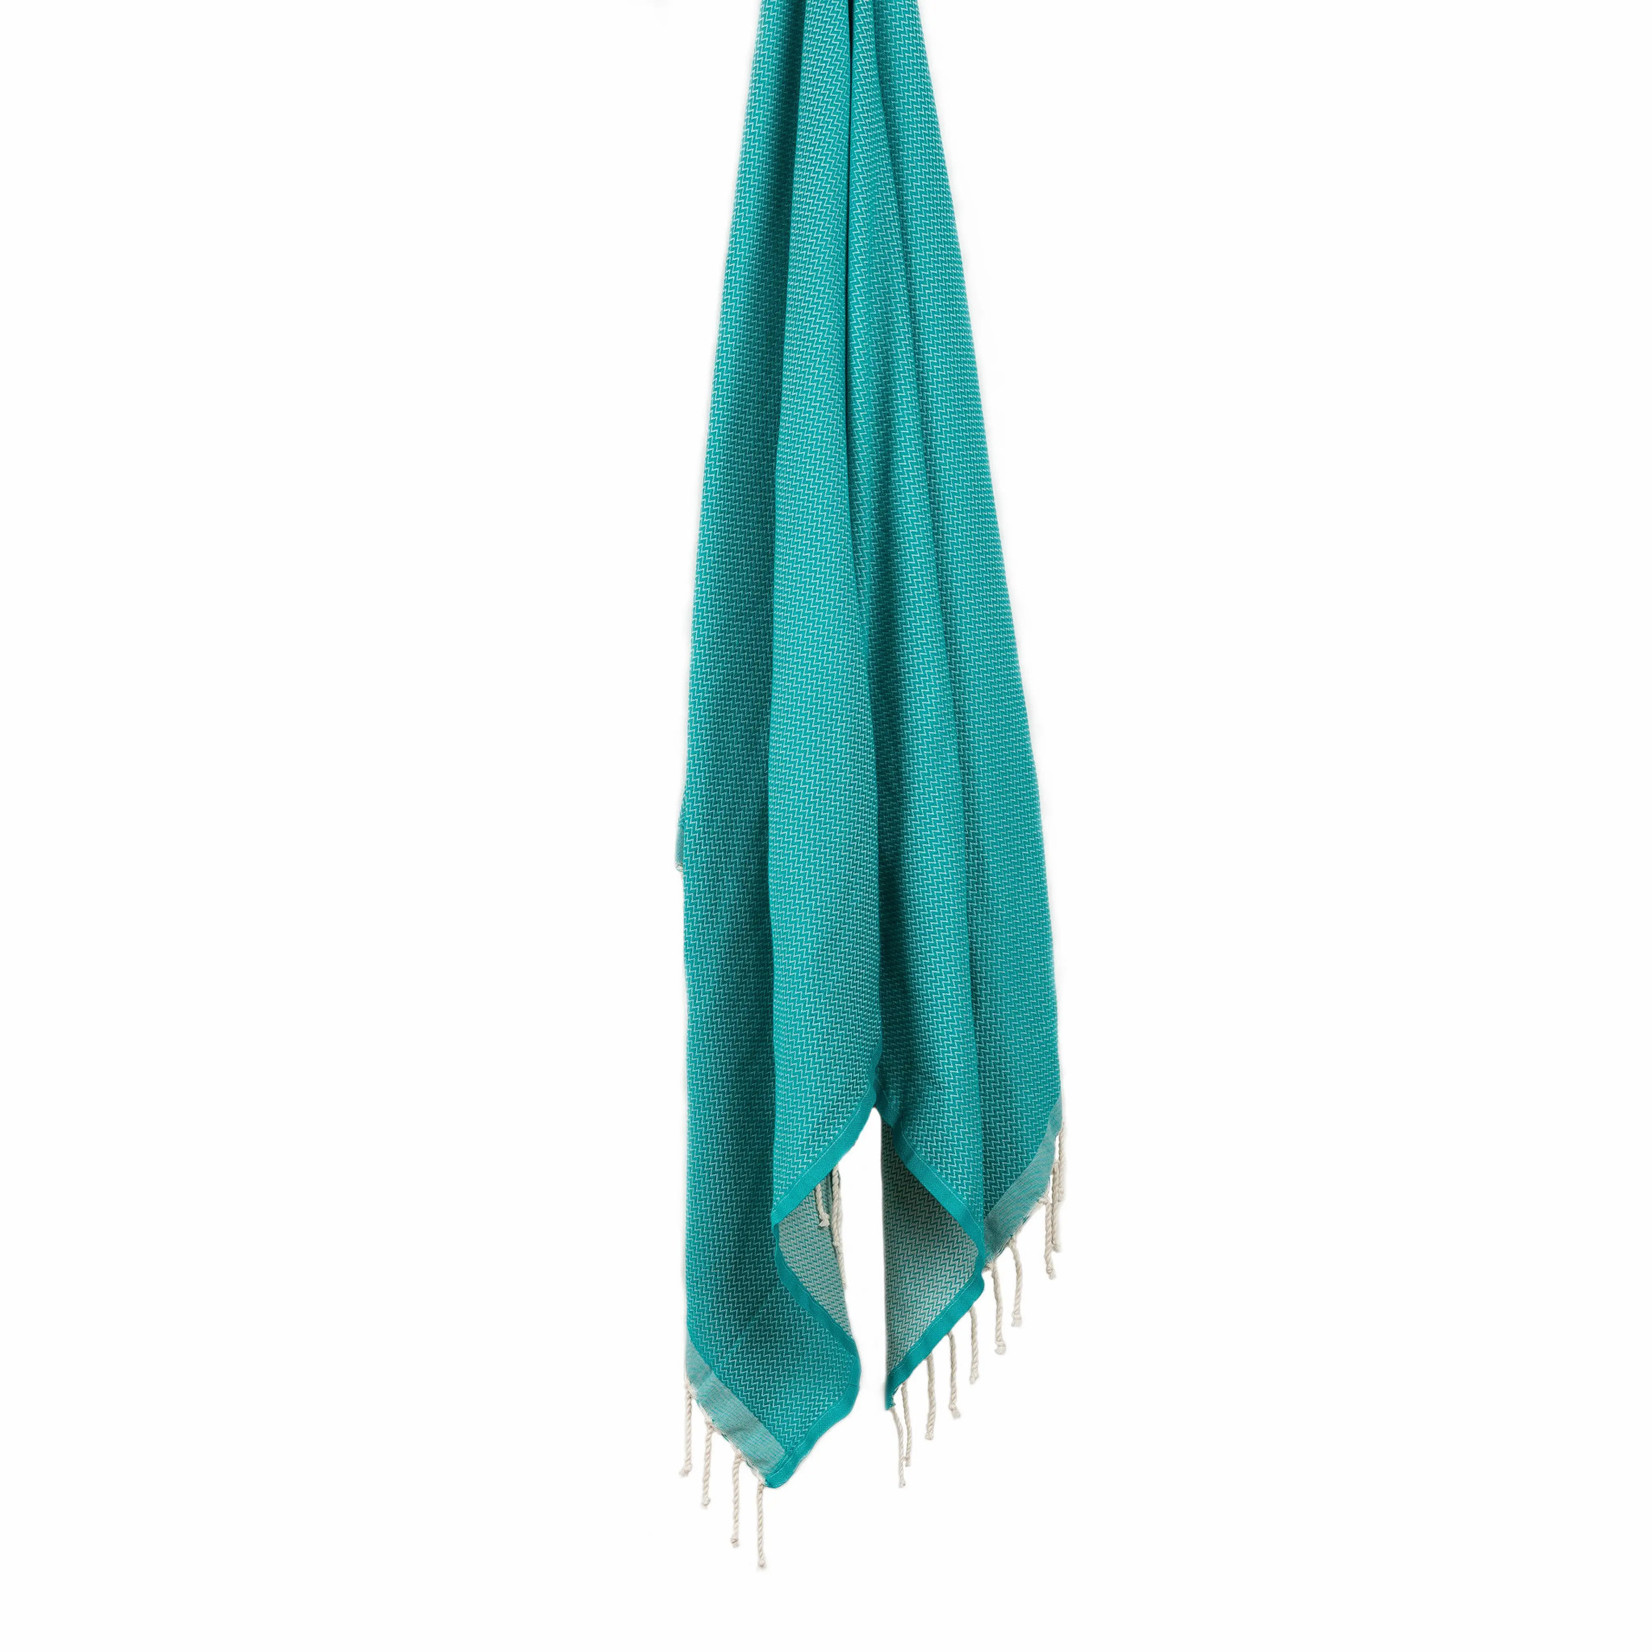 Blem Beach Accessories Blem Beach Turquoise The Luxe Towel